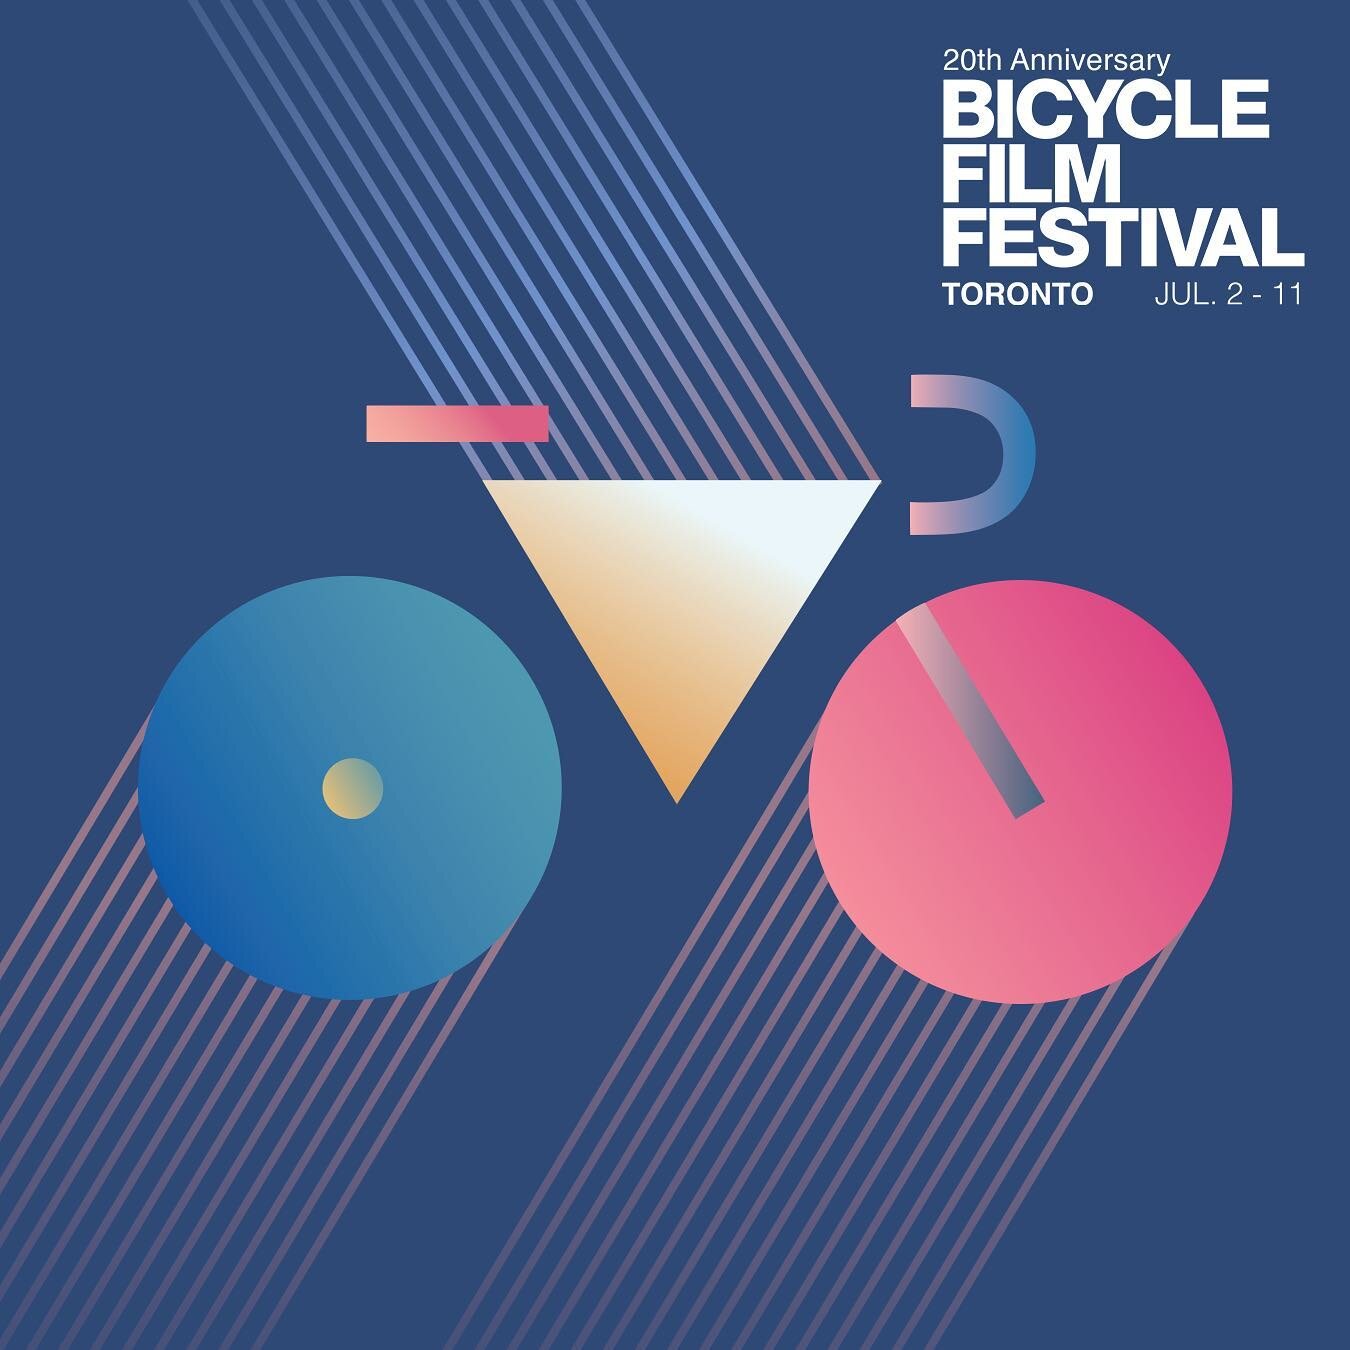 @bicyclefilmfestival Toronto is happening virtually July 2&ndash;July 11.

BFF Toronto presents an international short film program that will appeal to a wide audience from film connoisseurs to avid cyclists and everything in between. Get tickets thr